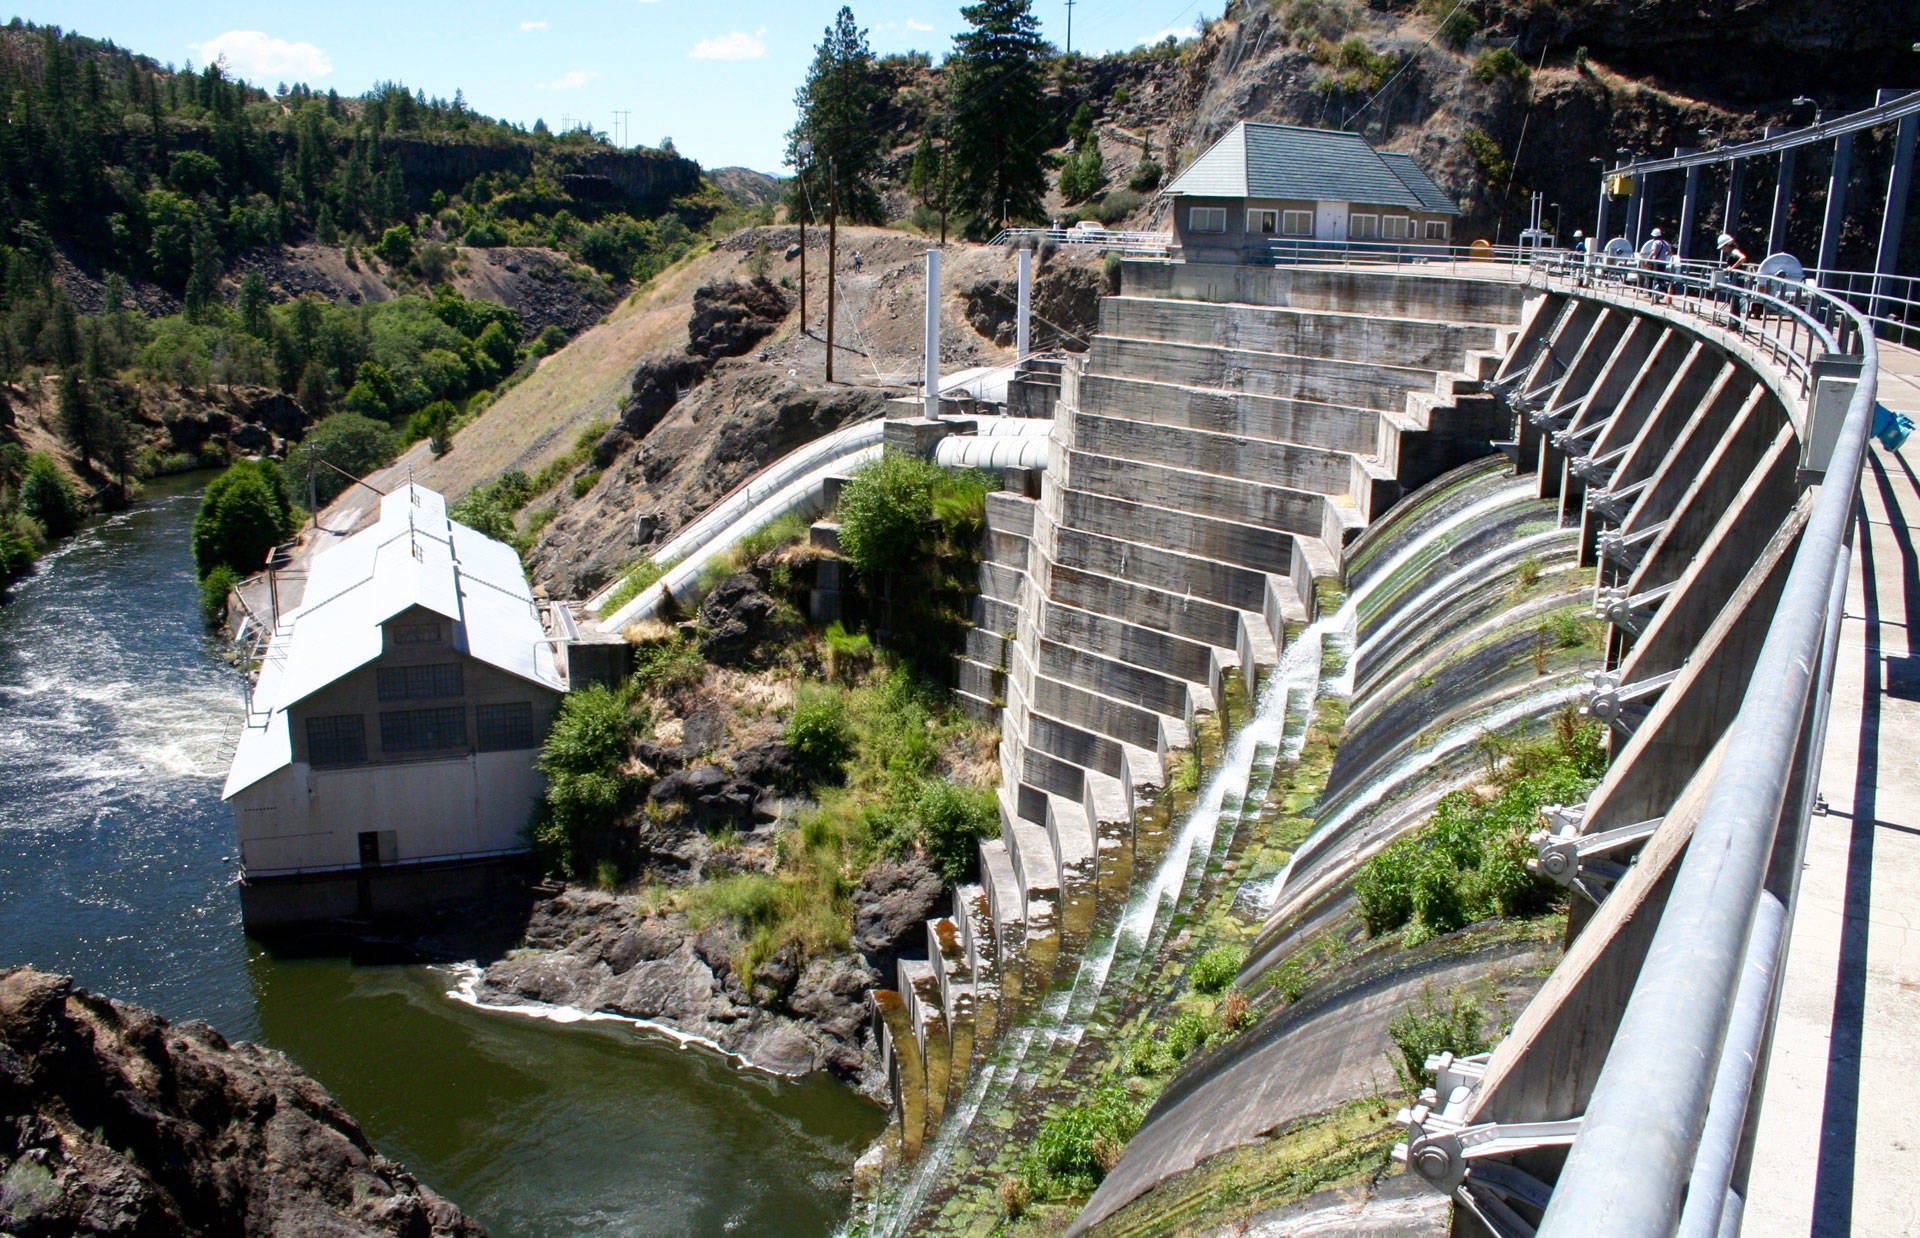 Removal of Klamath Dams Would Be Largest River Restoration in U.S. History | KQED